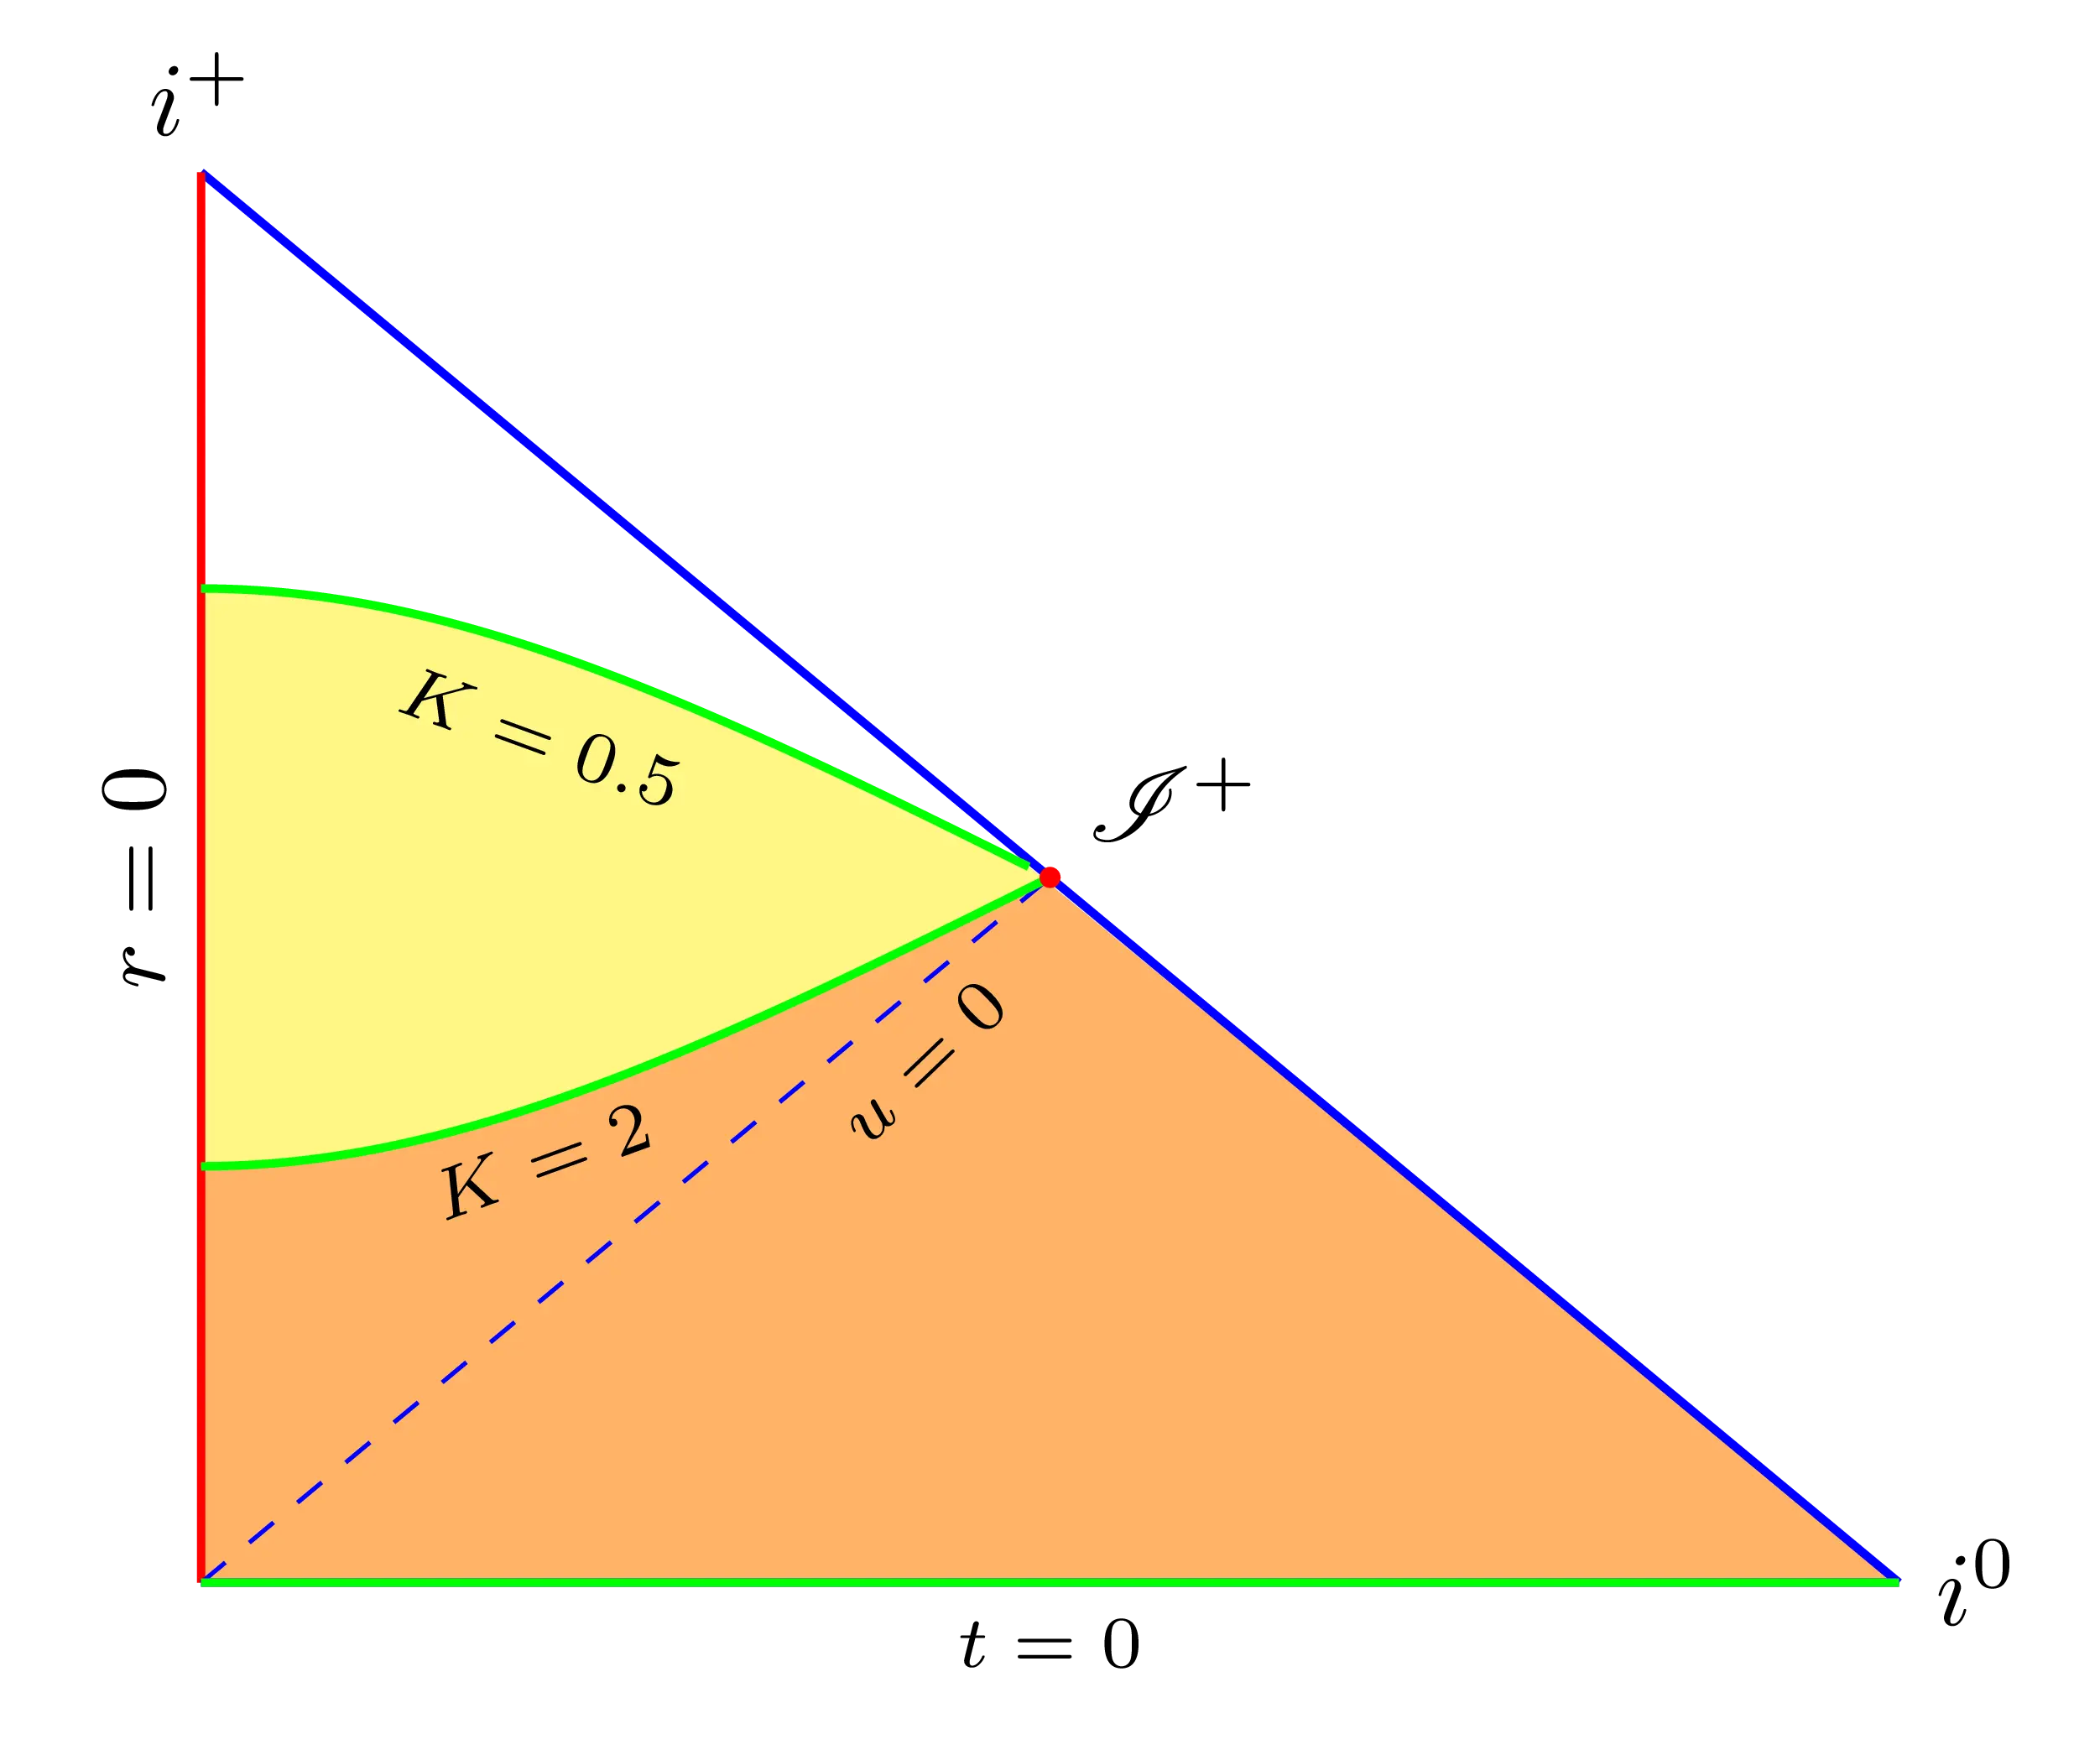 Smaller curvature $K$ corresponds to larger spacetime volume irrespective of the reference surface.